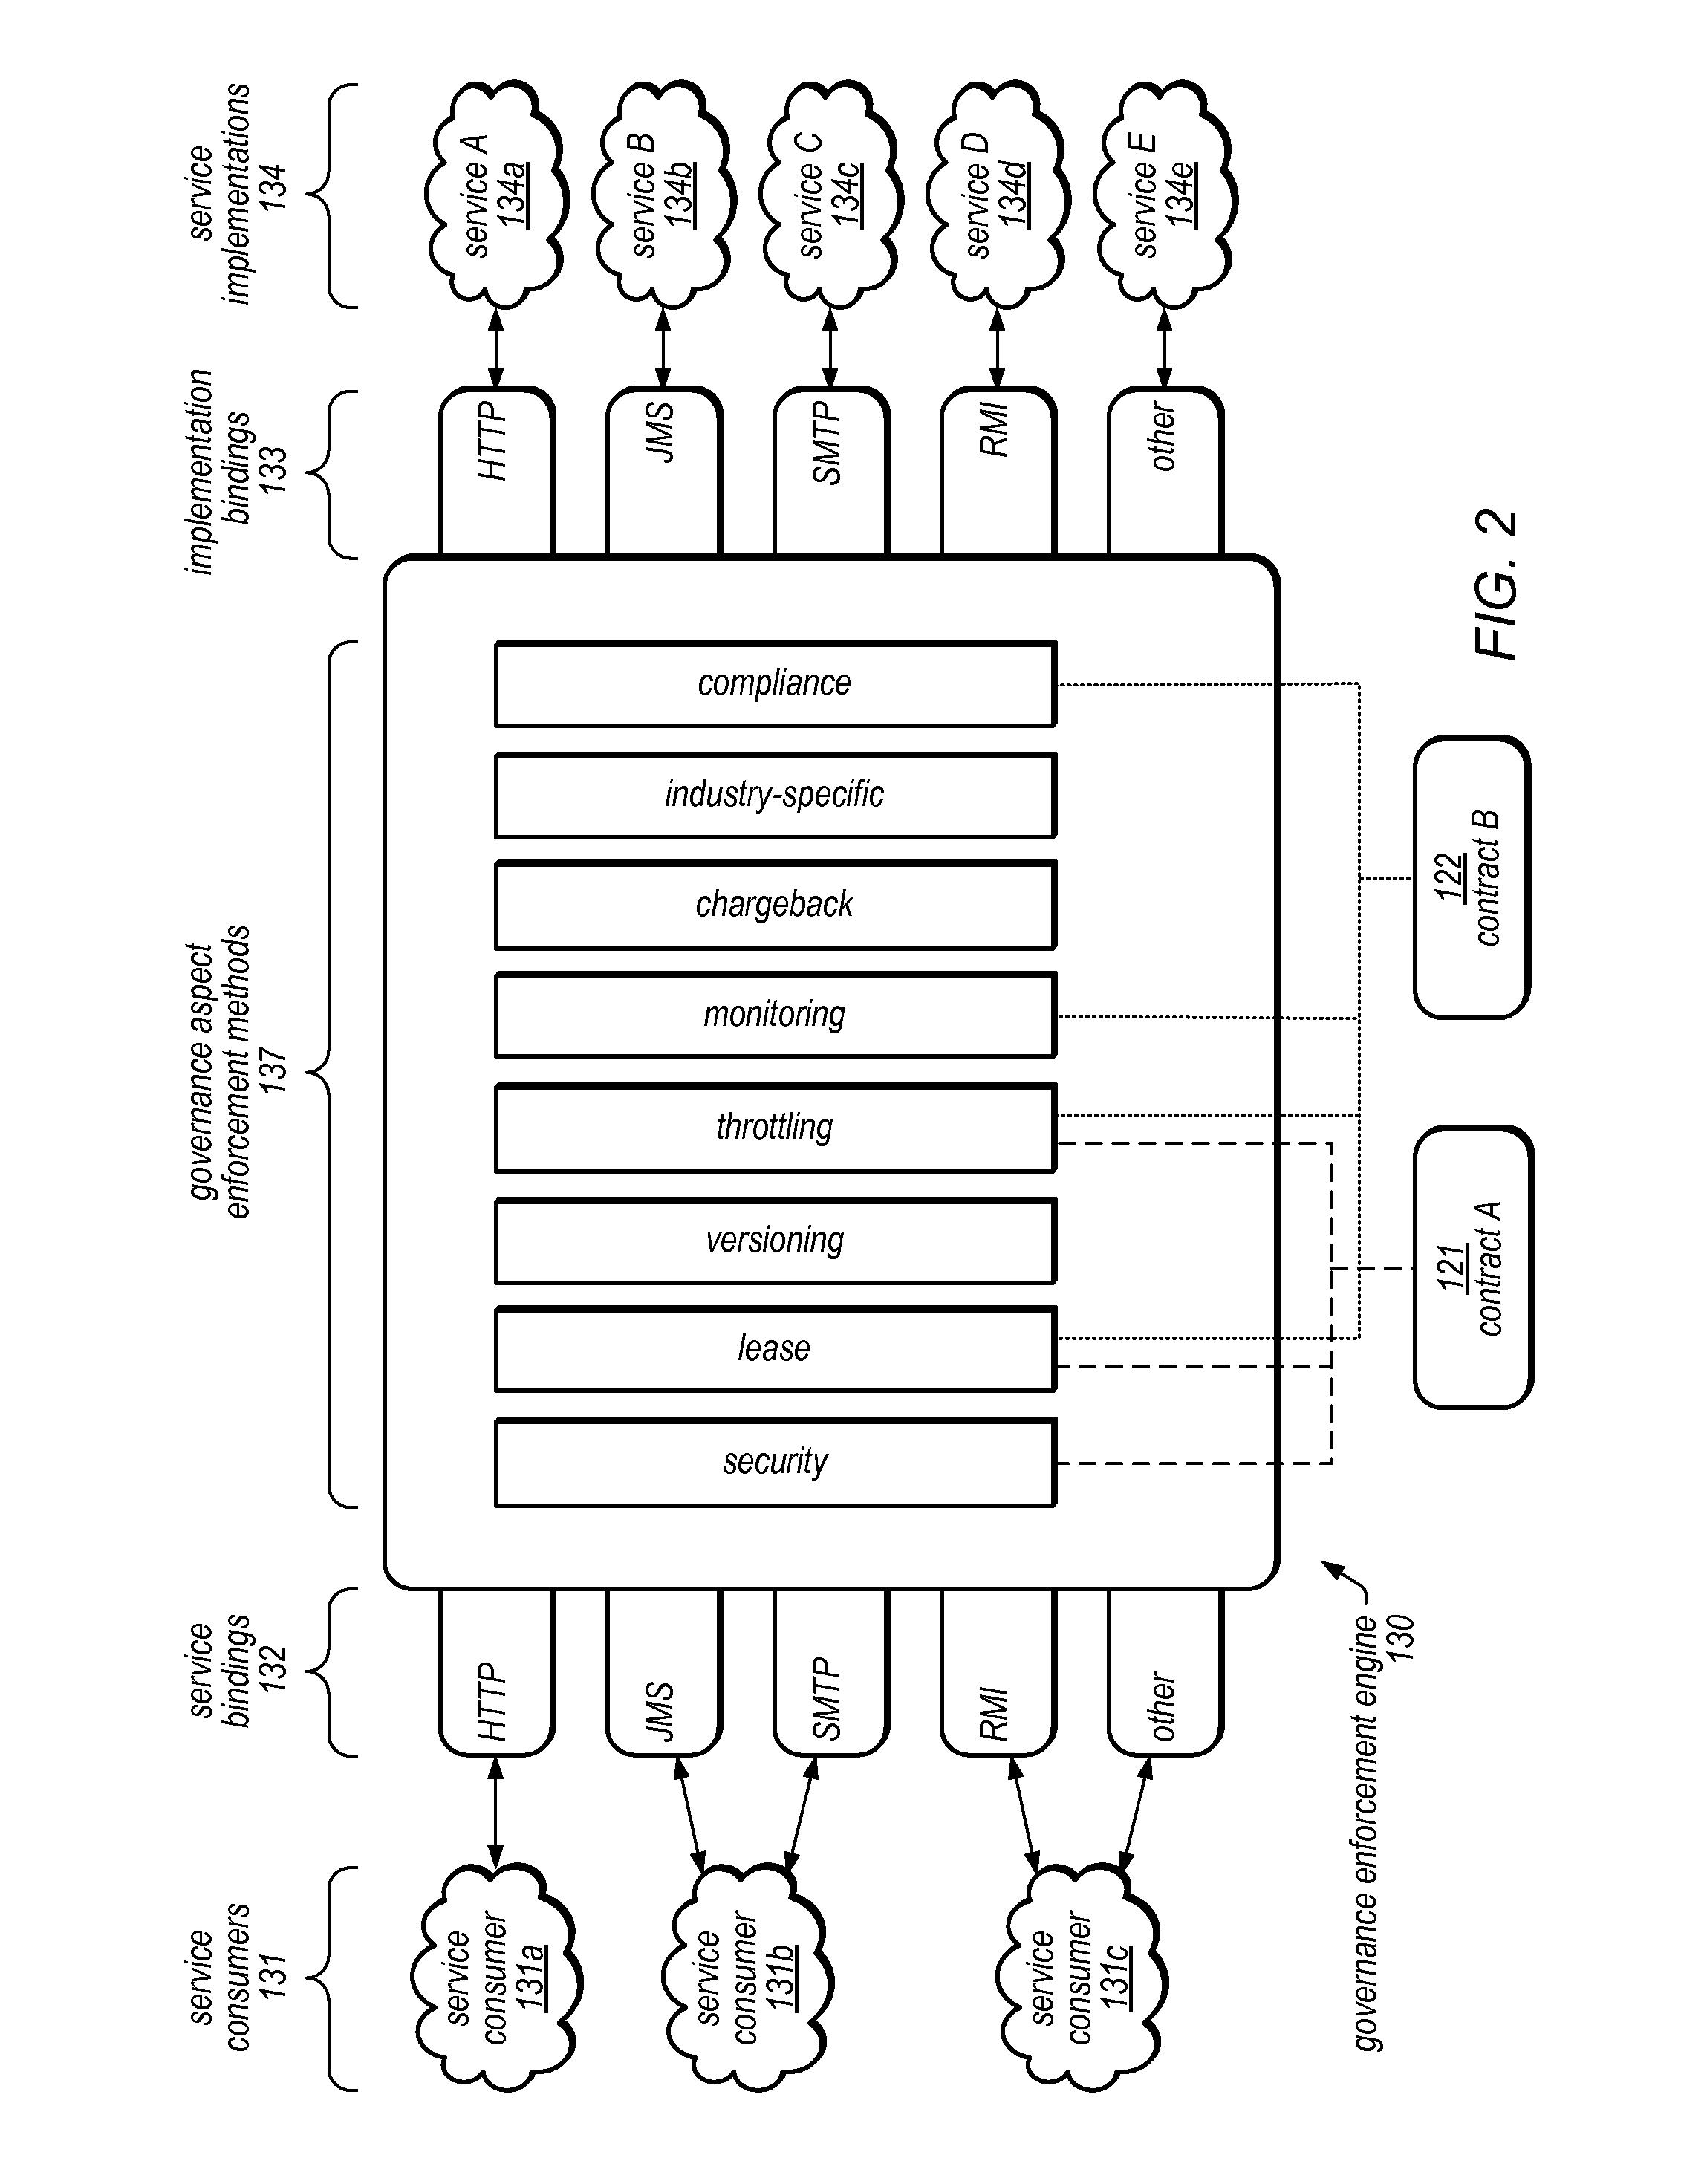 System and Method for Service Virtualization in a Service Governance Framework